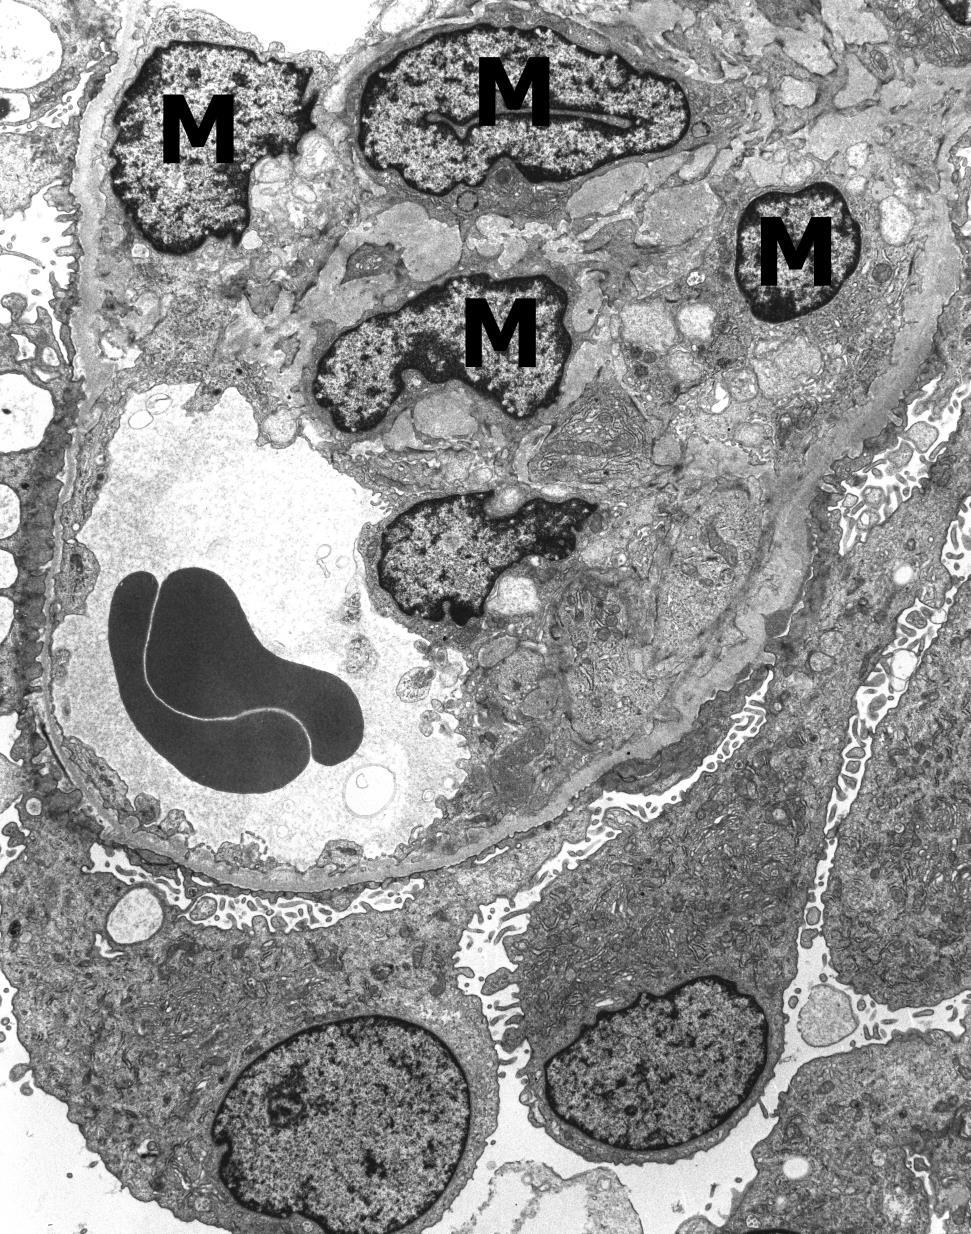 Mesangial Hypercelluarity The glomerular mesangium contains increased matrix and four nuclei (M).